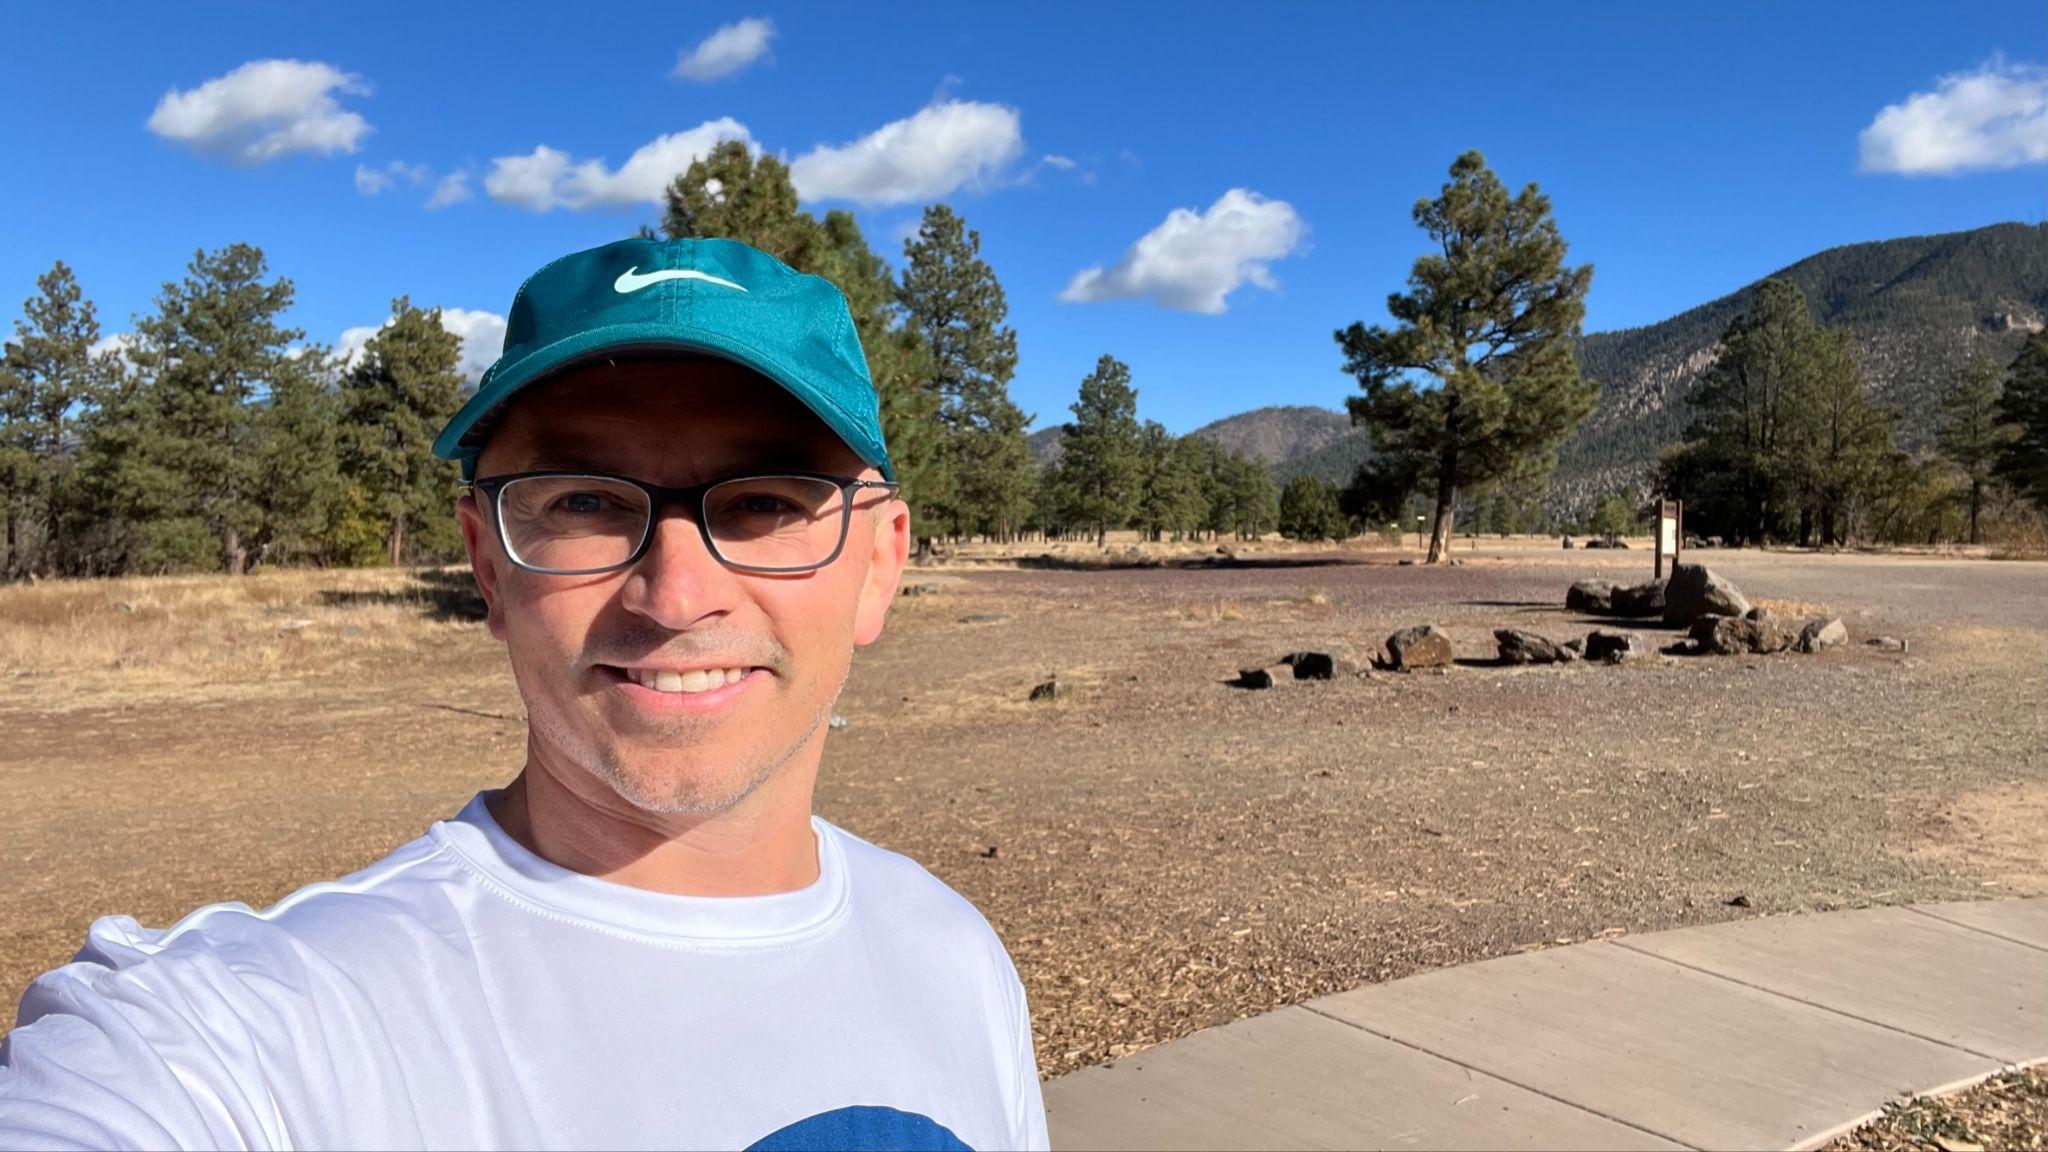 A picture of me at Buffalo Park in Flagstaff AZ